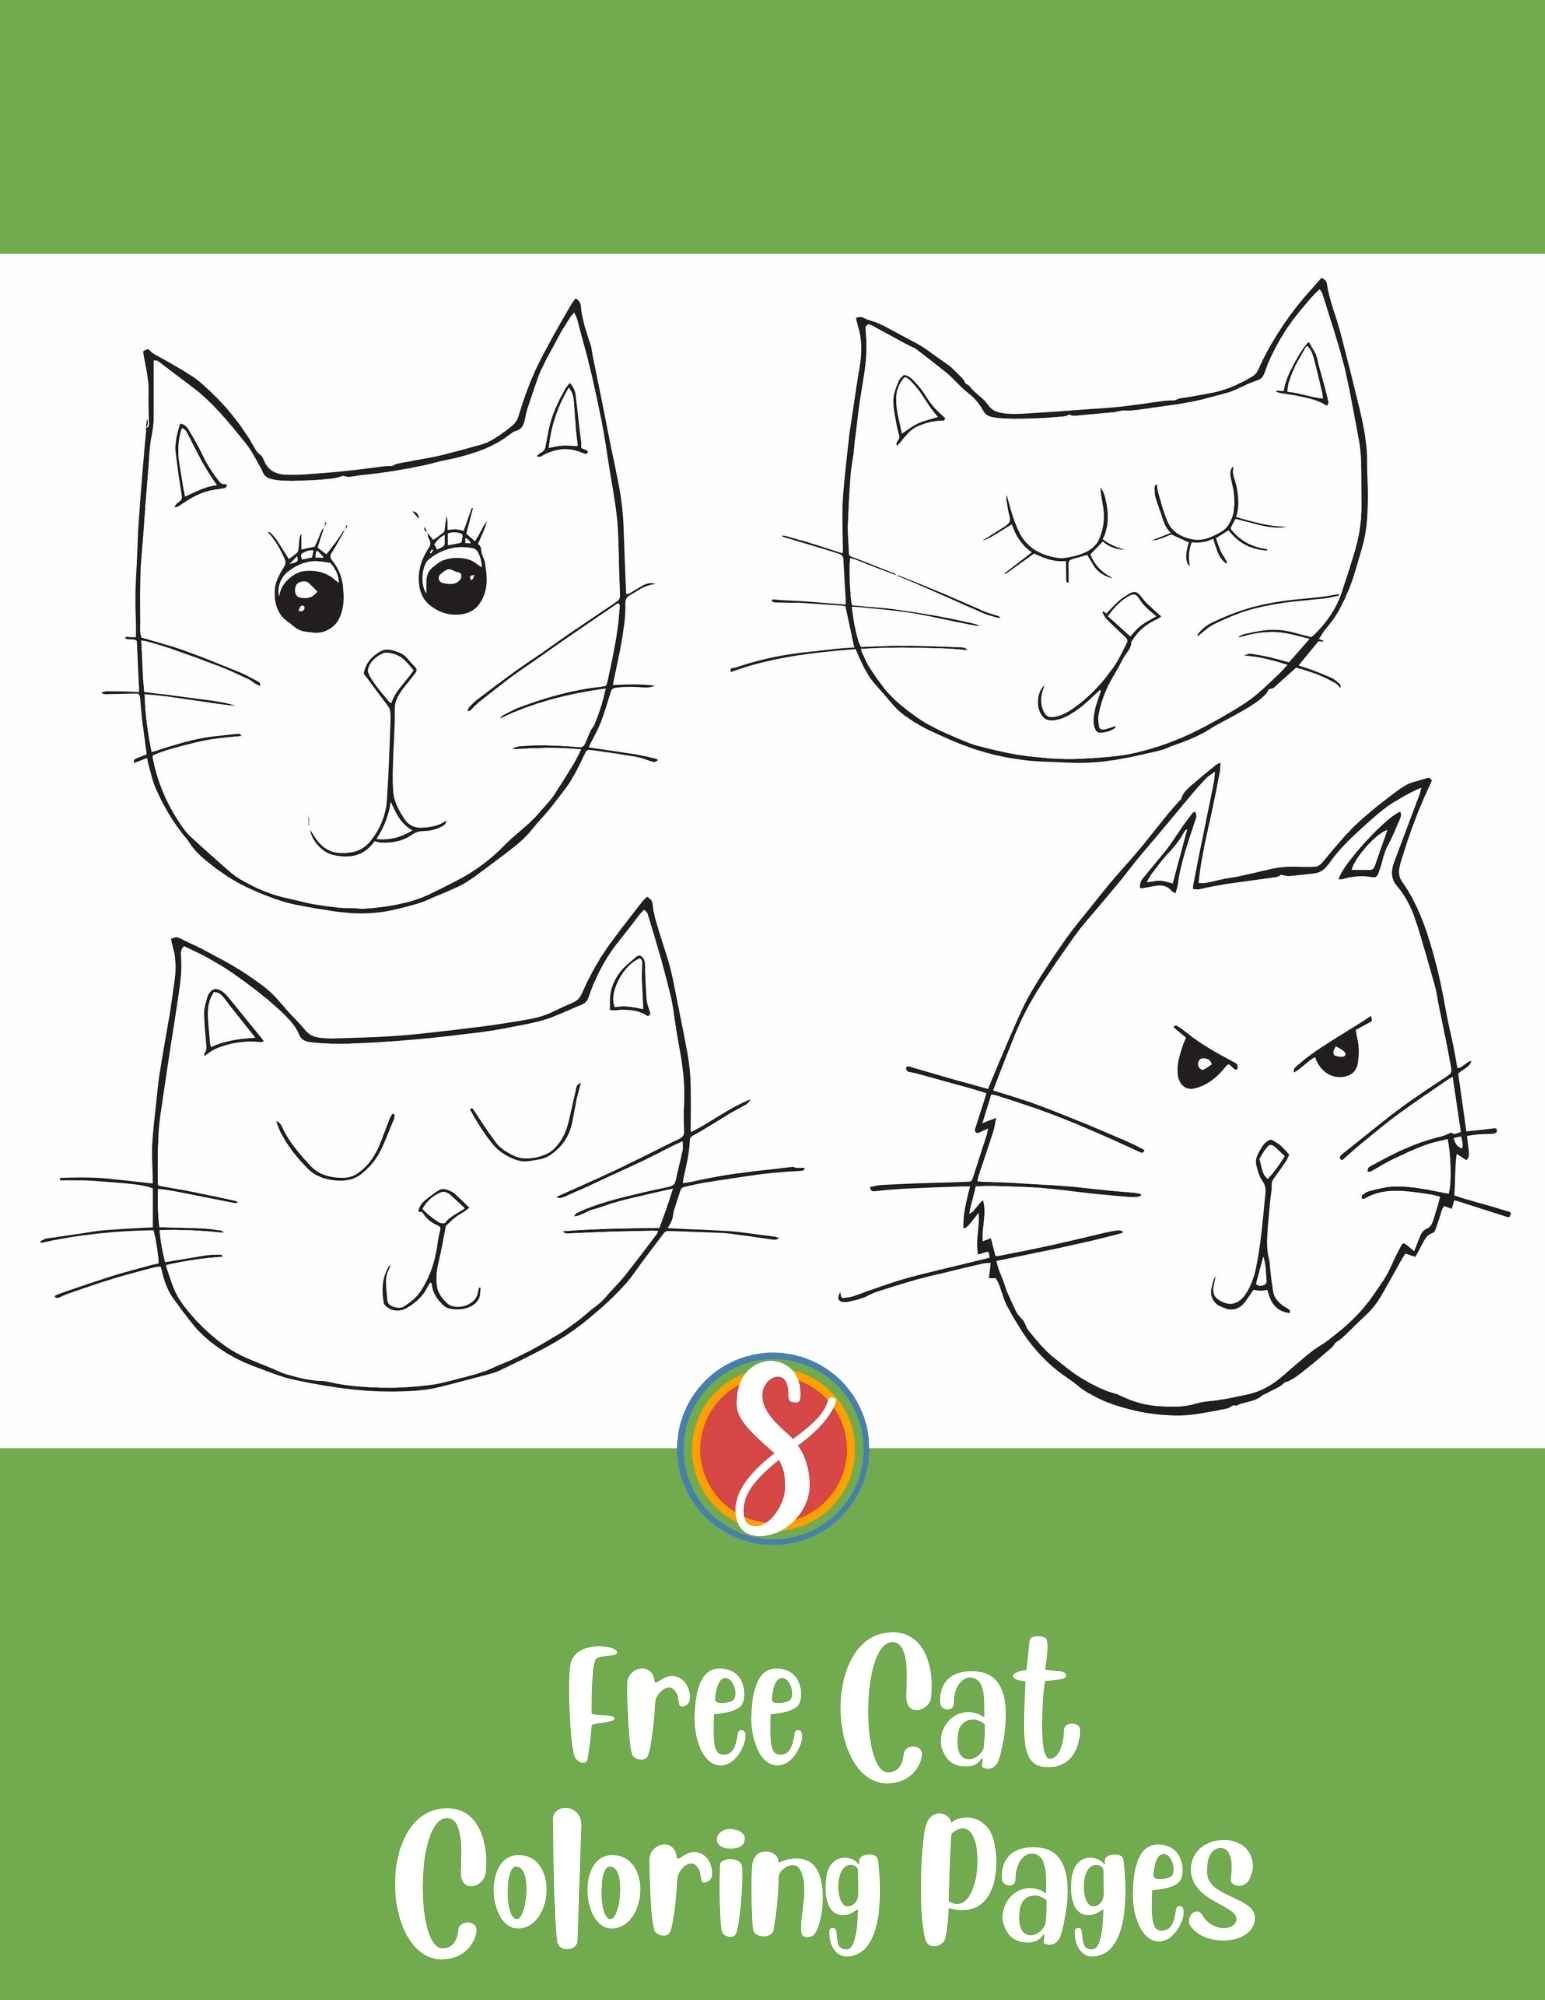 cat coloring page with 4 simple cat faces